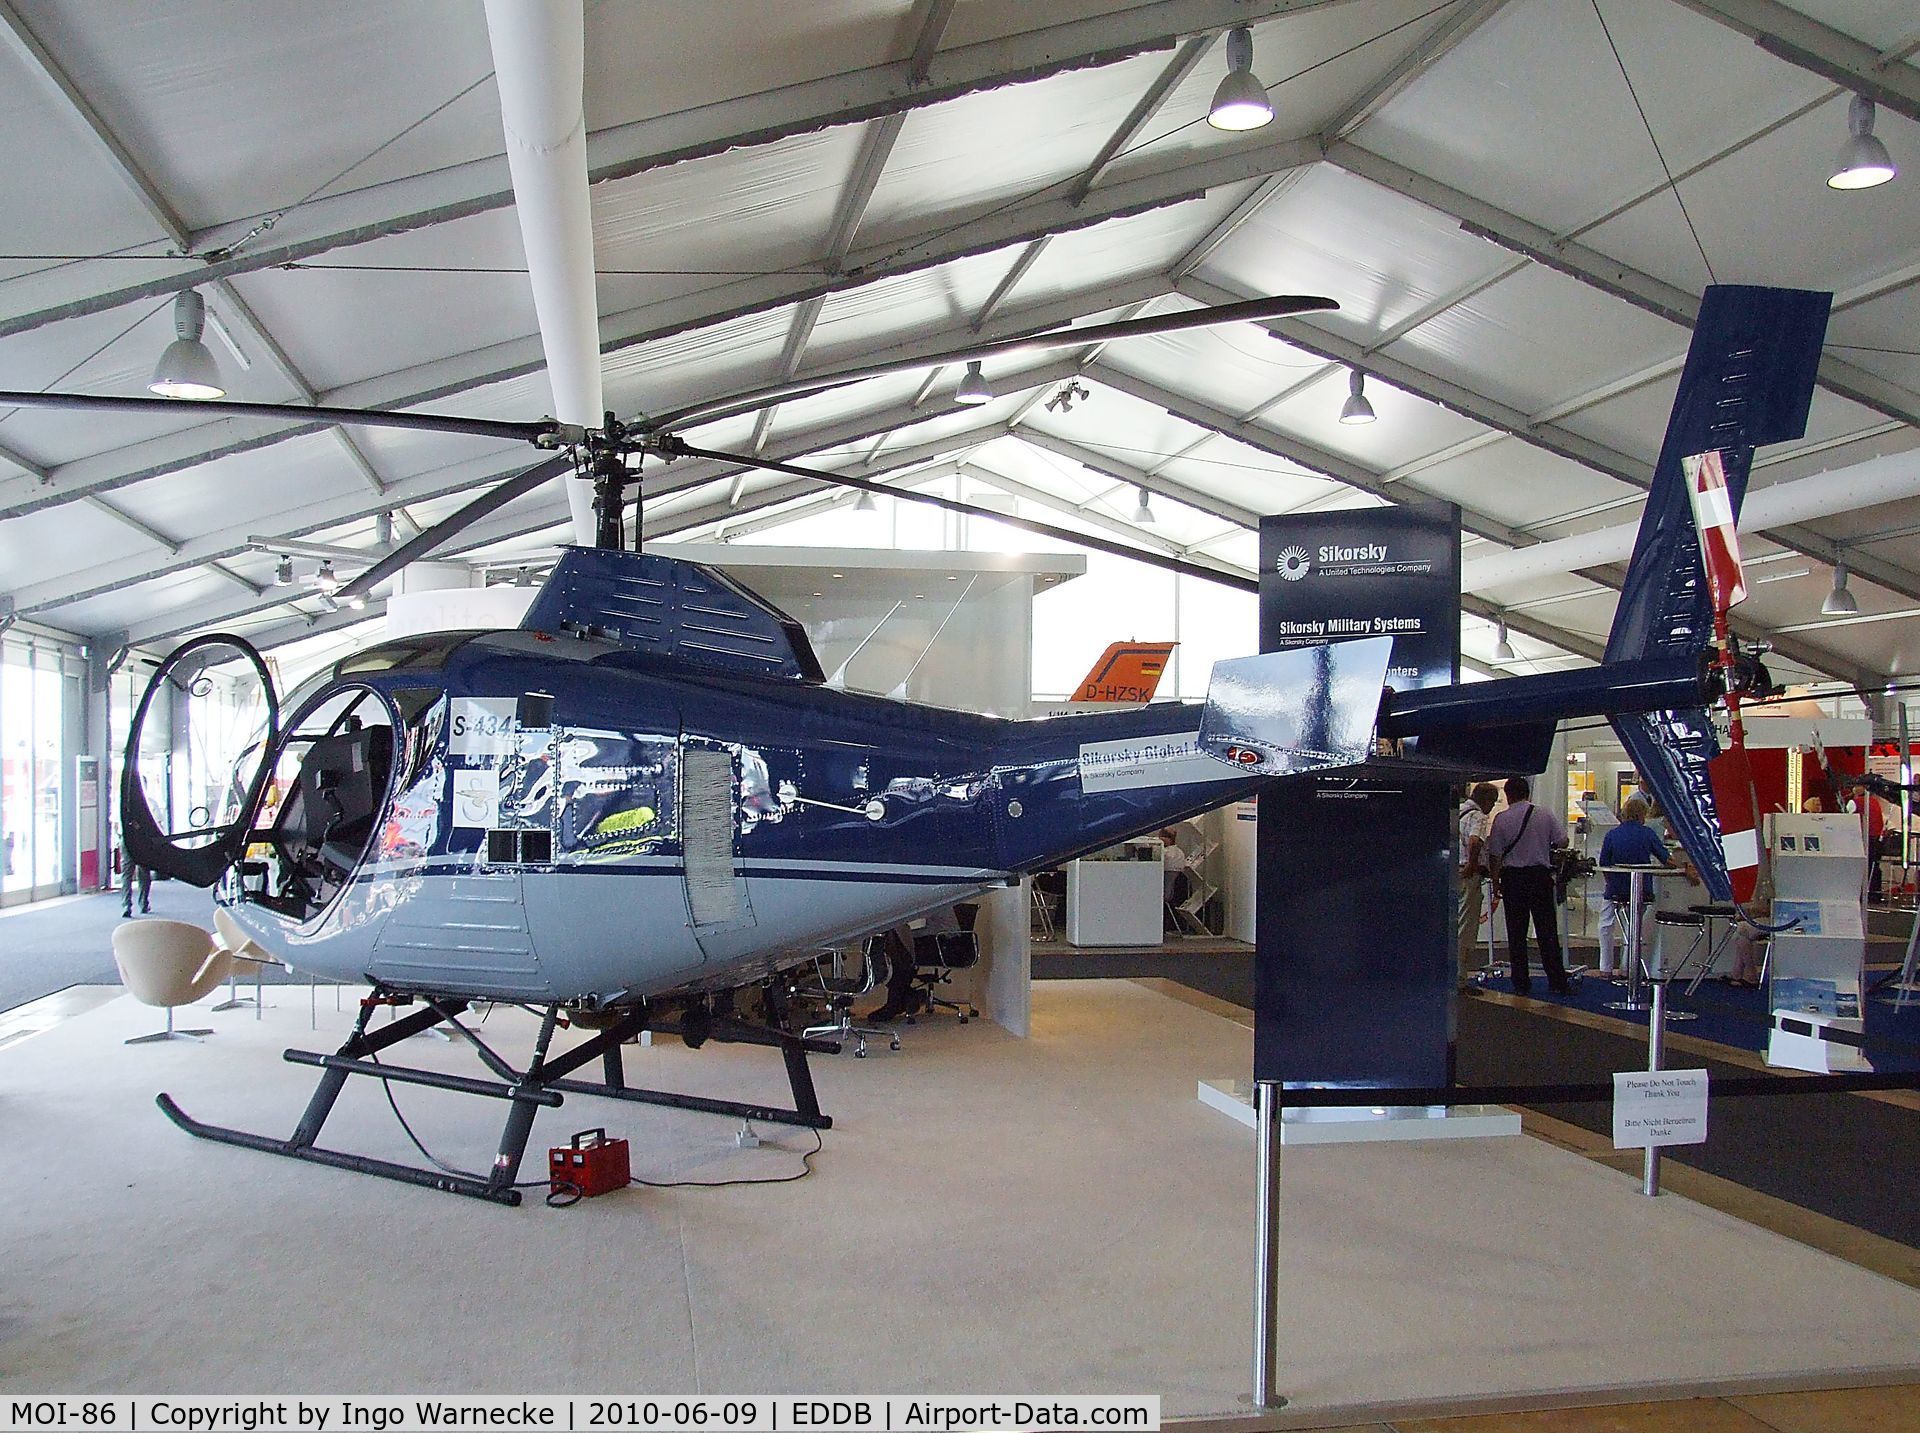 MOI-86, Sikorsky / Schweizer S-434 C/N 0086MB, Sikorsky / Schweizer S-434 of the Saudi Ministry of the Interior at ILA 2010, Berlin